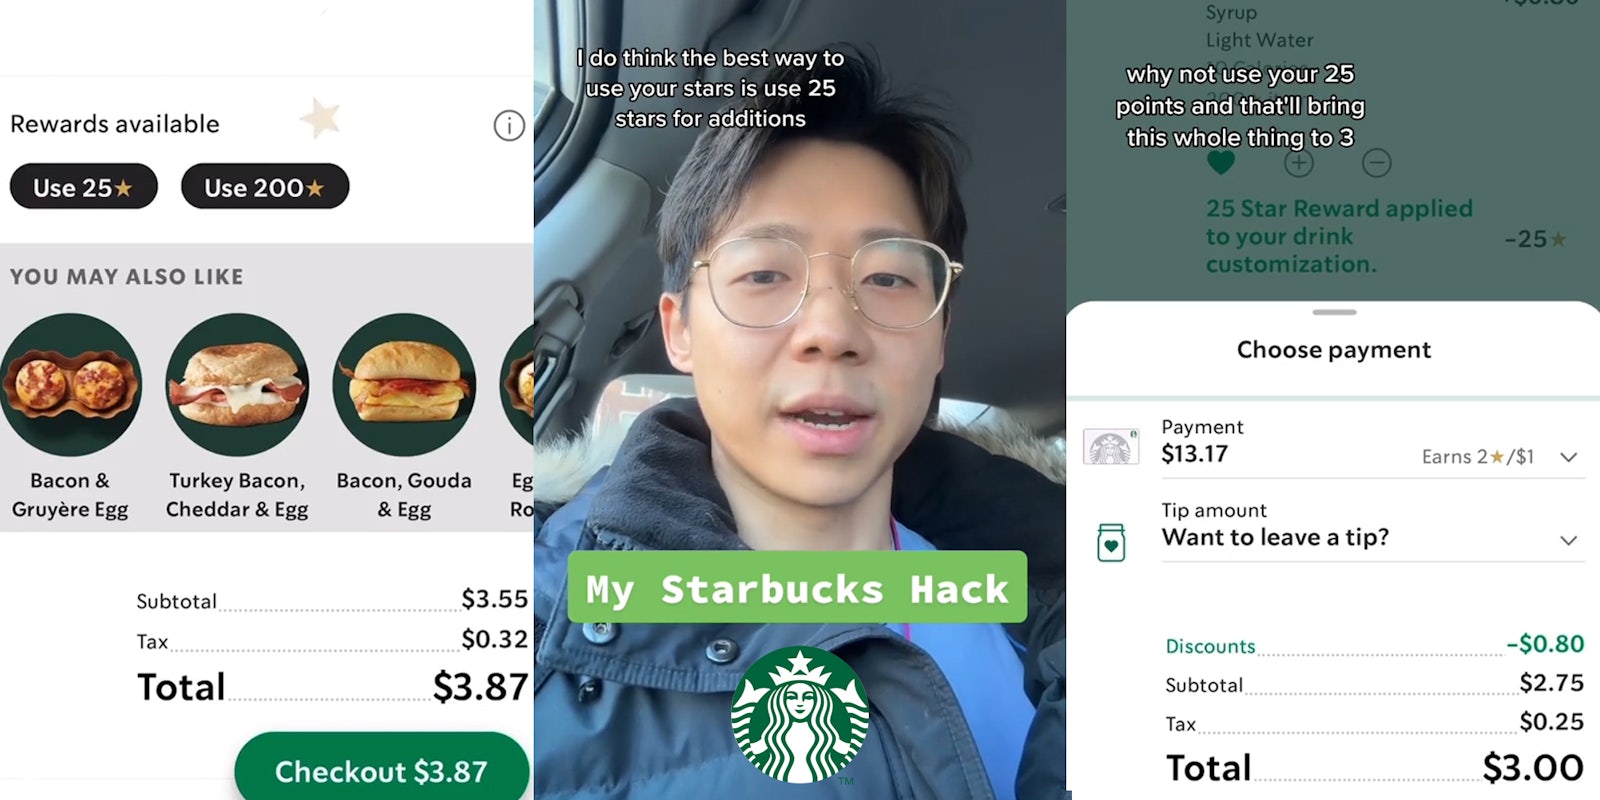 Starbucks app with total at $3.87 (l) man speaking in car with caption 'I do think the best way ro use your stars is use 25 stars for additions My Starbucks Hack' and Starbucks logo at bottom (c) Starbucks app with total at $3.00 with caption 'why not use your 25 points and that'll bring this whole thing to 3' (r)